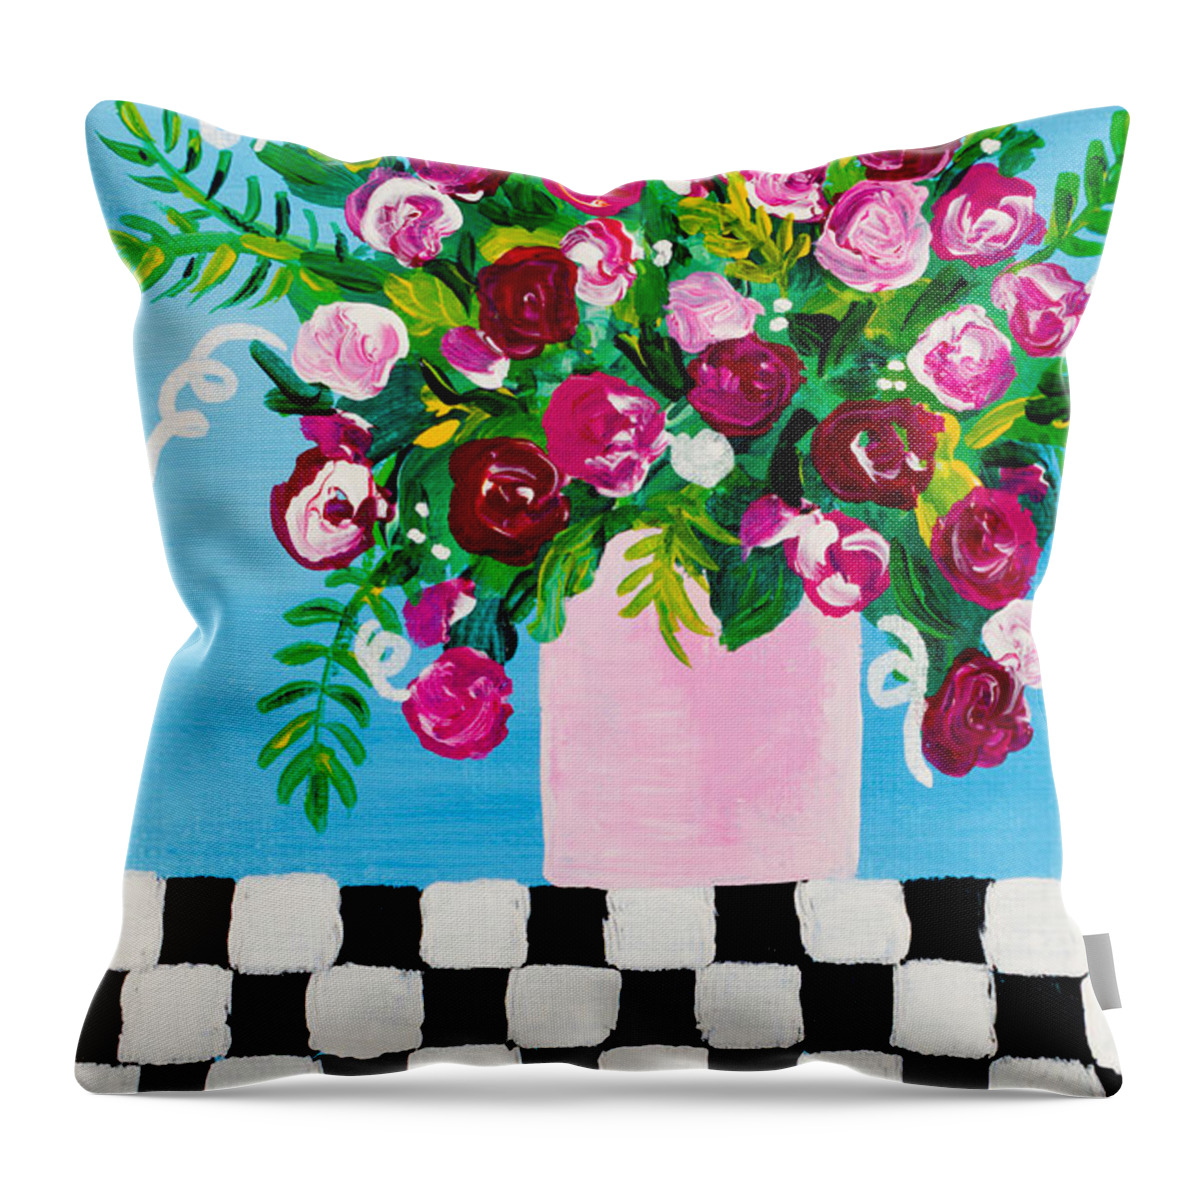 Black And White Check Throw Pillow featuring the painting Mini Check 1 by Beth Ann Scott